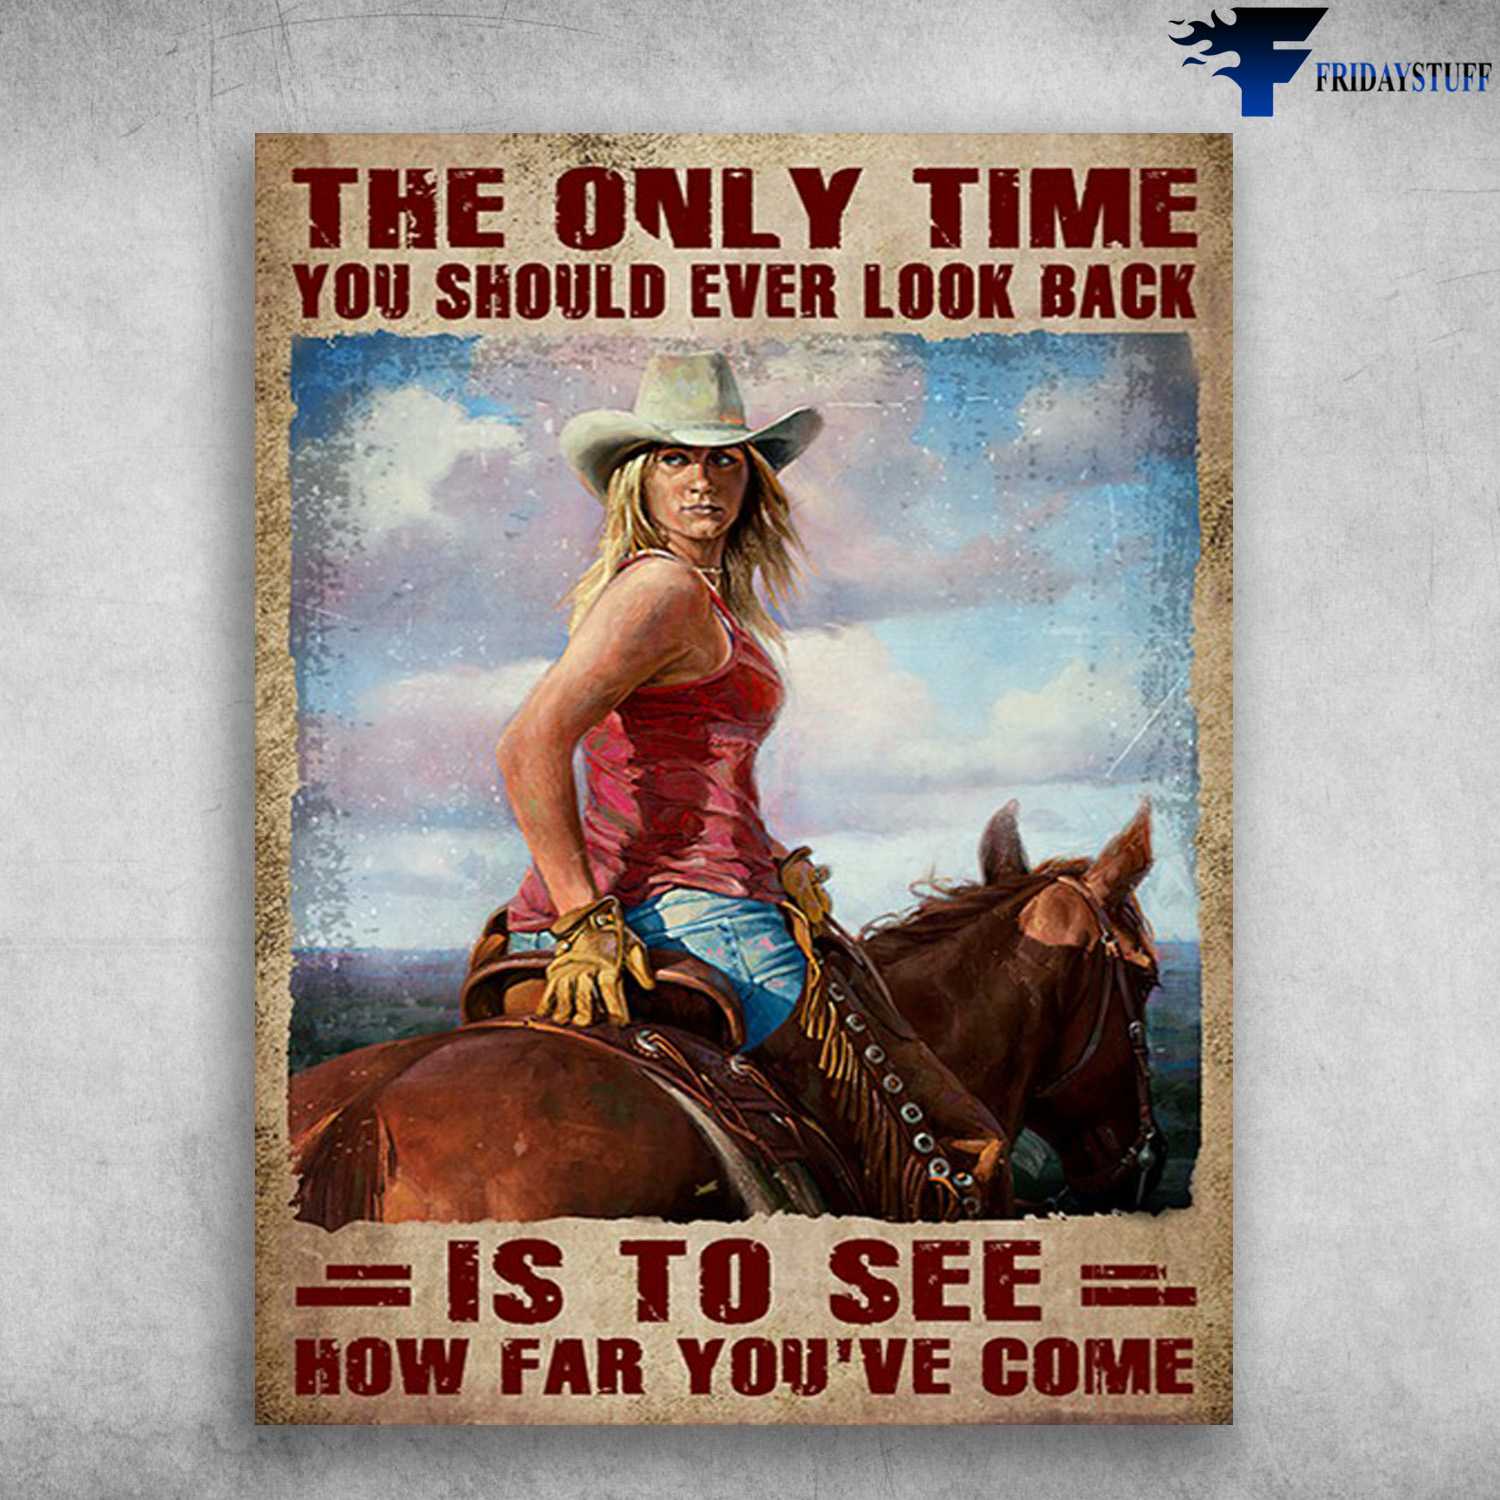 Cowgirl Riding, Horse Riding - The Only Time You Should Ever Look Back, Is To See How Far You've Come